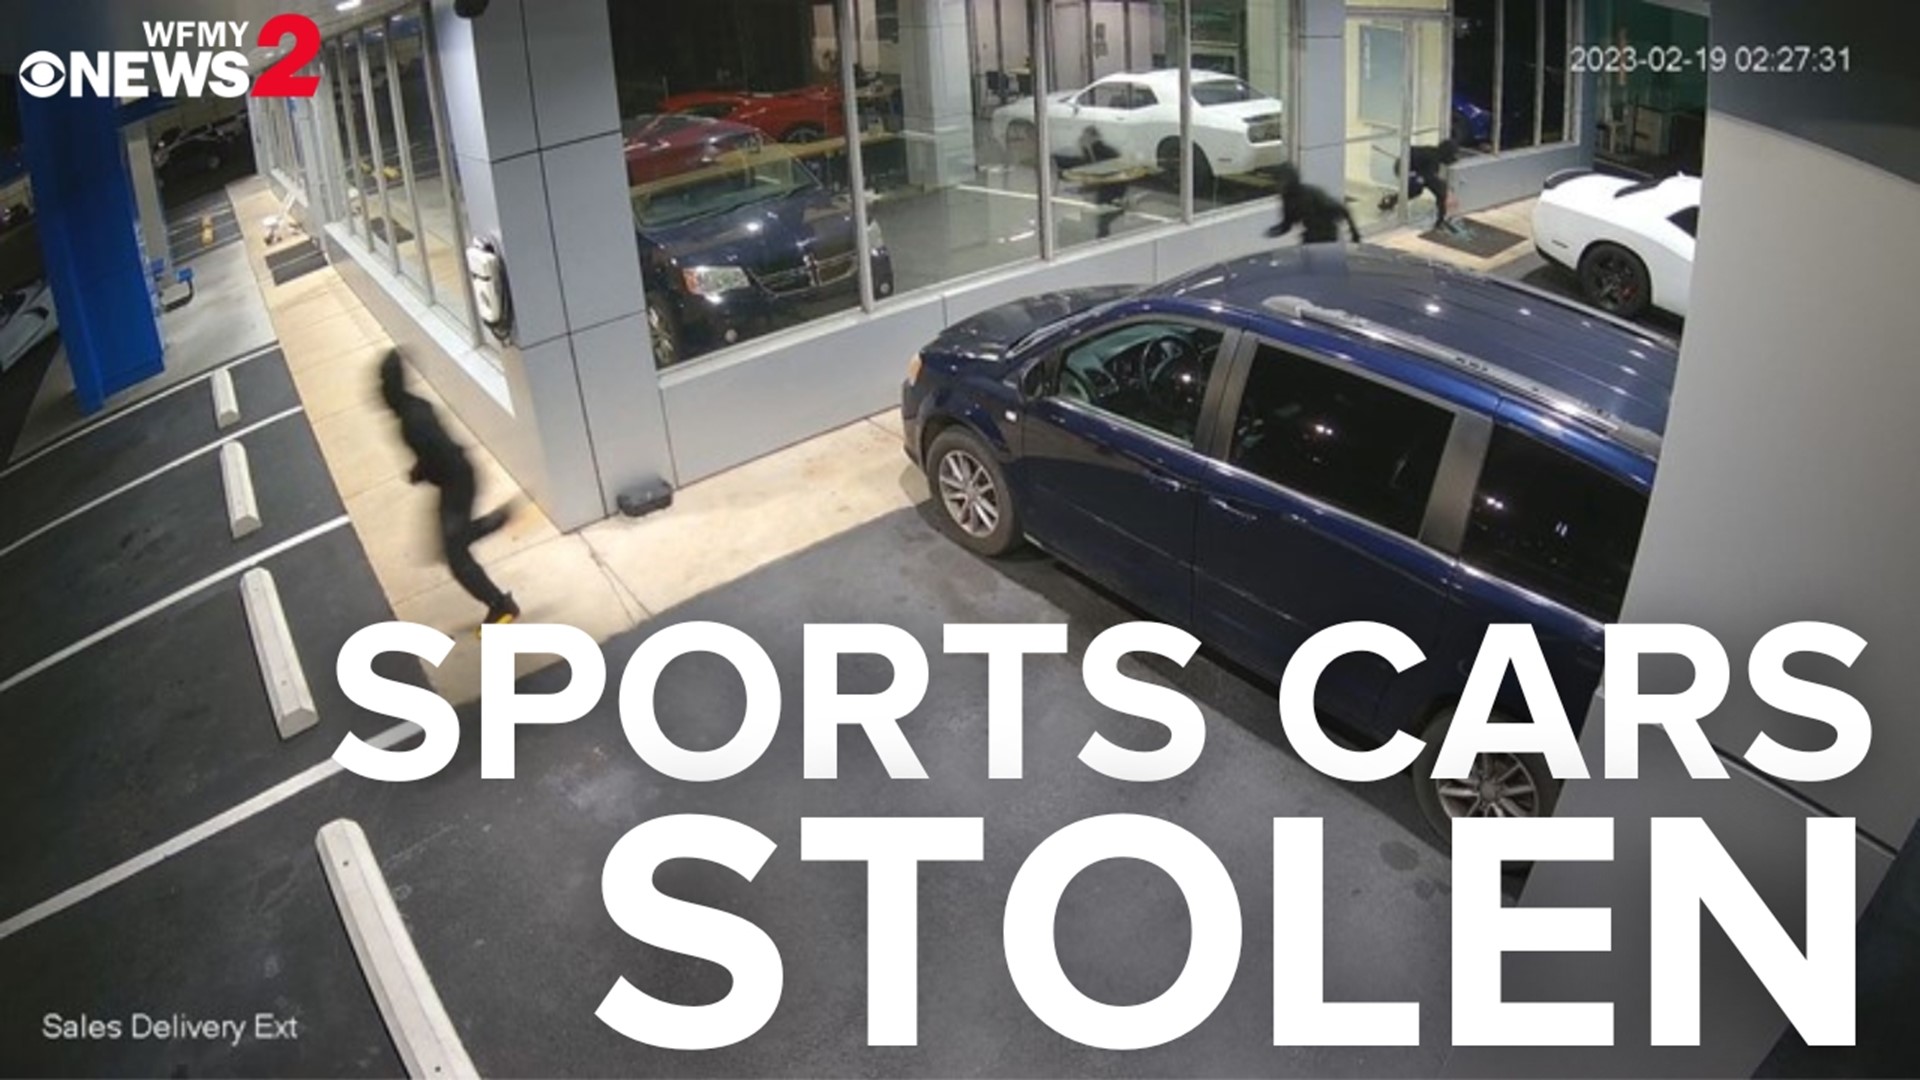 Security footage caught the thieves on camera, inside and outside Capital Chevrolet Buick GMC in Lexington. They got away with Corvettes, Camaros, and more.